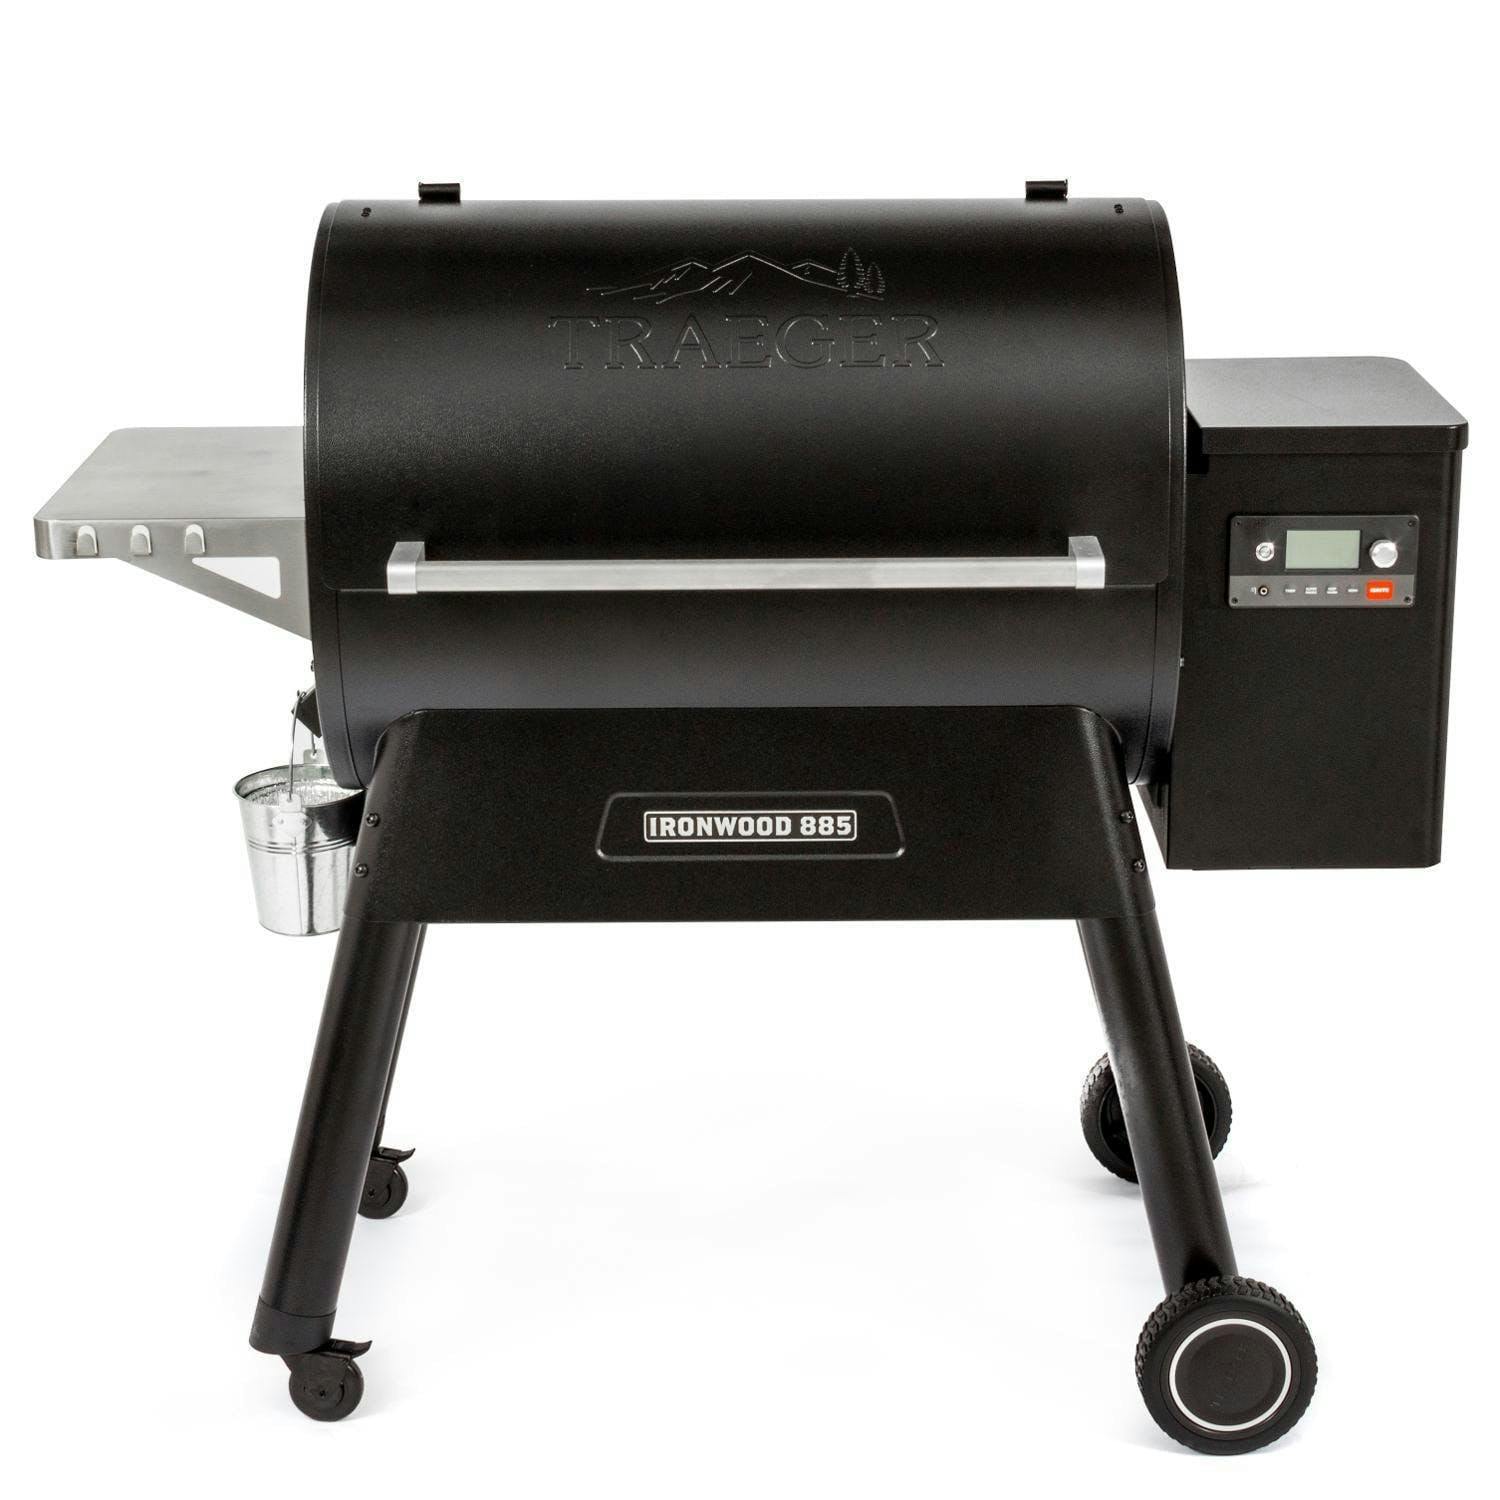 Traeger Ironwood Wi-Fi Controlled Wood Pellet Grill